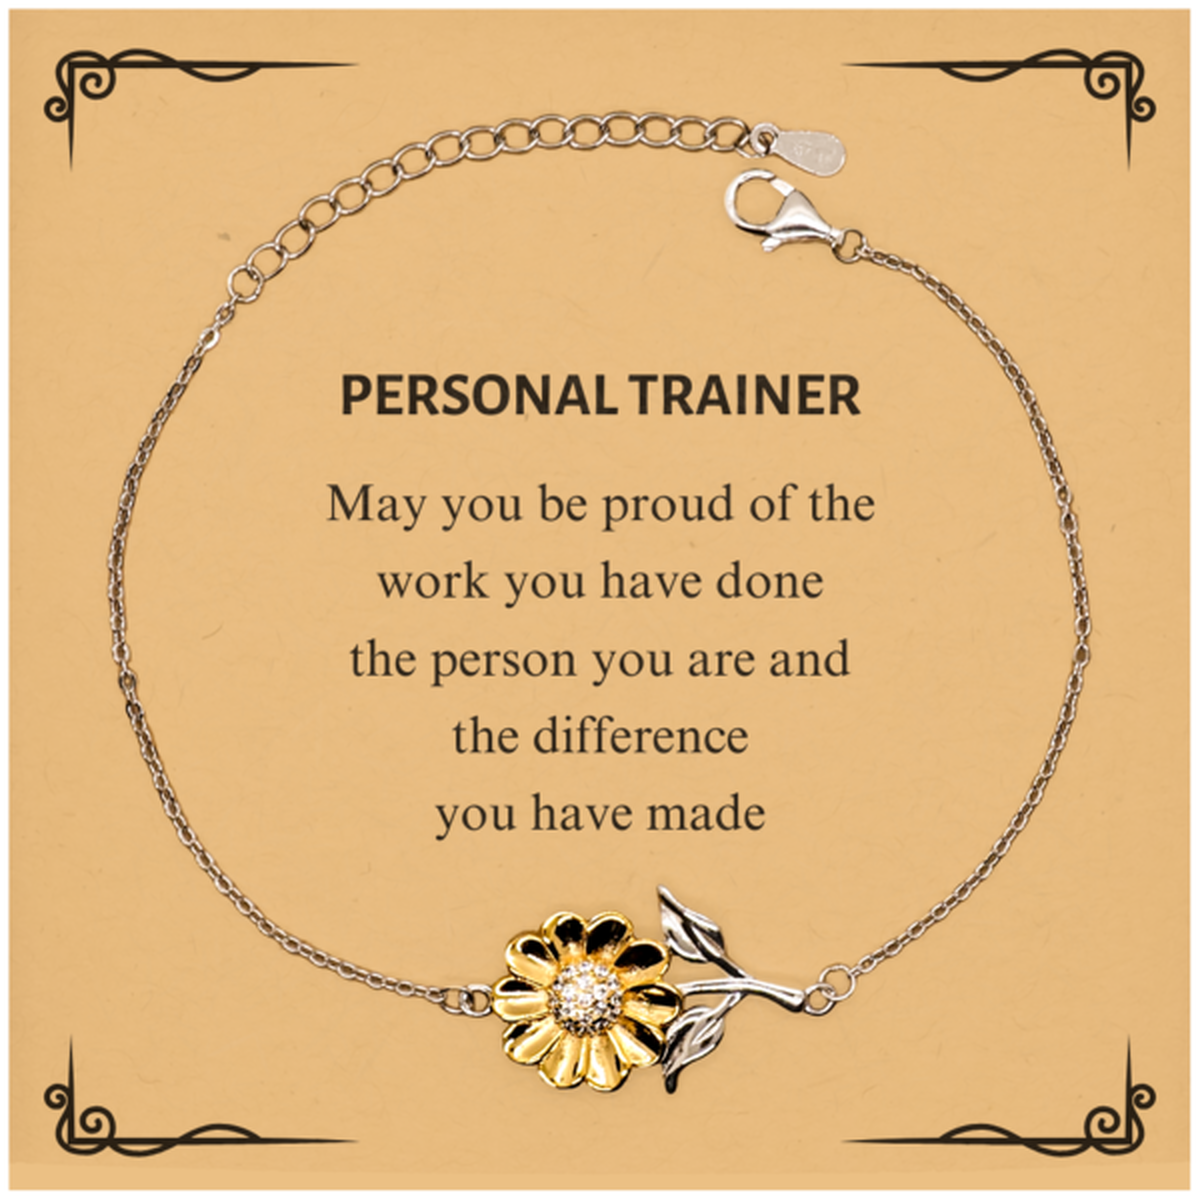 Personal Trainer May you be proud of the work you have done, Retirement Personal Trainer Sunflower Bracelet for Colleague Appreciation Gifts Amazing for Personal Trainer